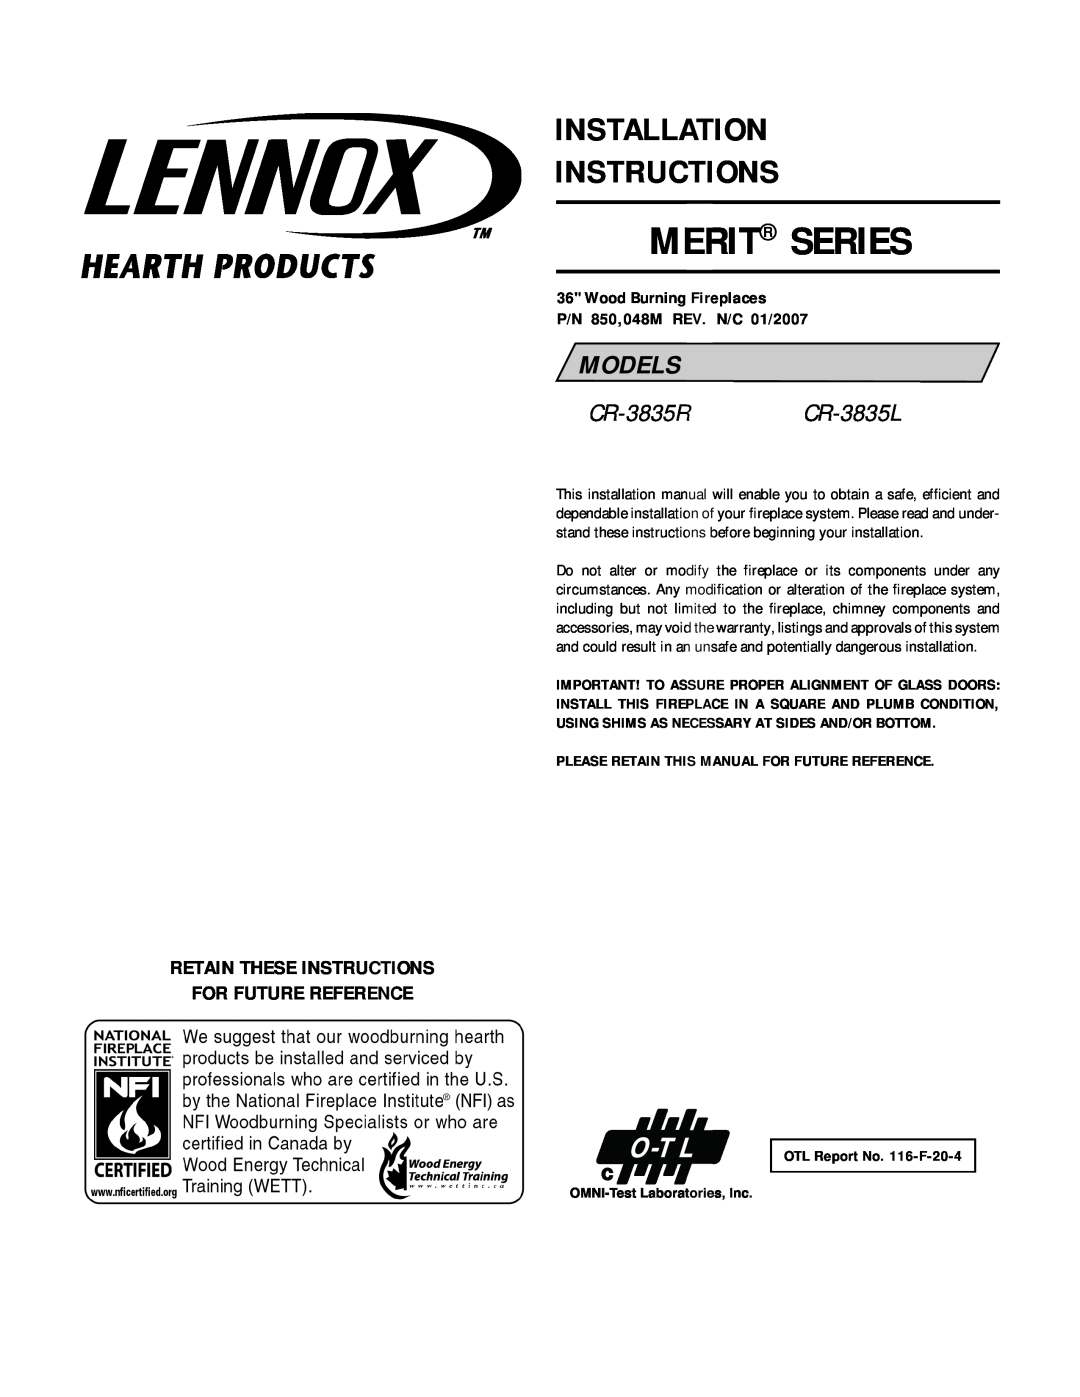 Lennox Hearth CR-3835R installation instructions Retain These Instructions For Future Reference, Wood Burning Fireplaces 